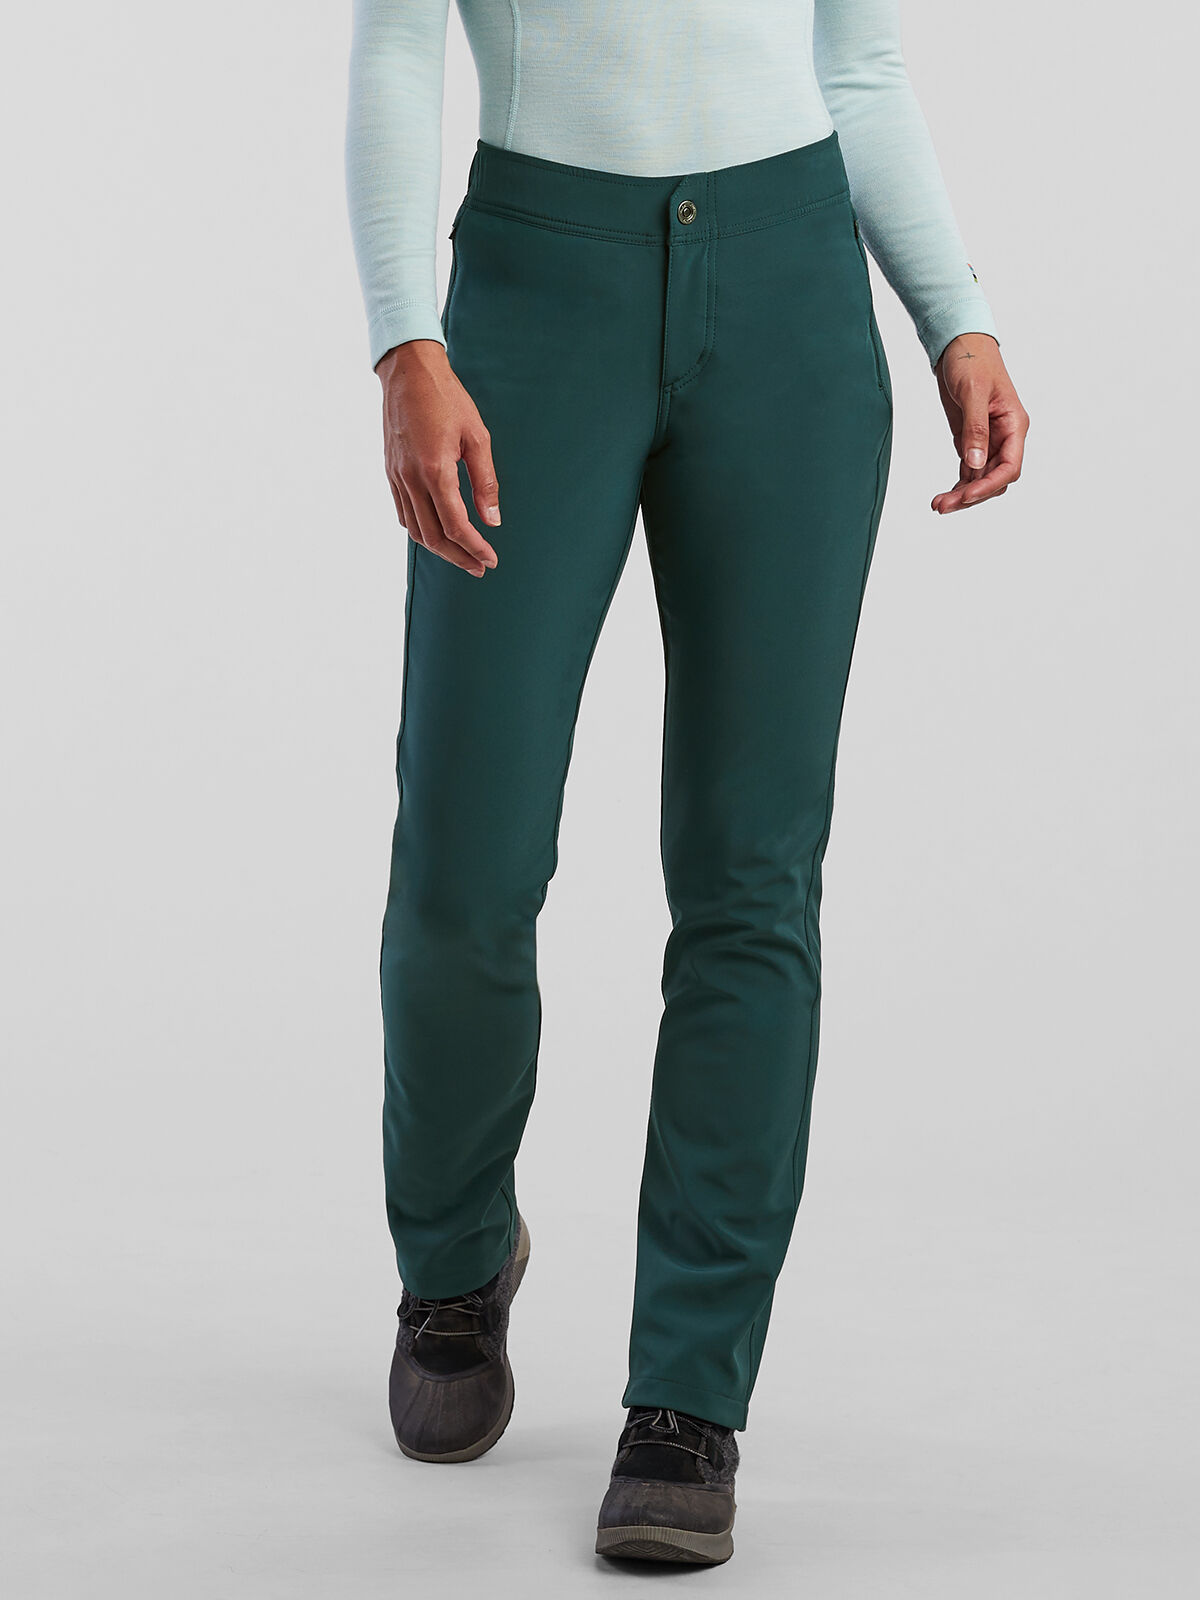 Kuhl - Rydr Pant - Women's | Outdoor Gear Exchange